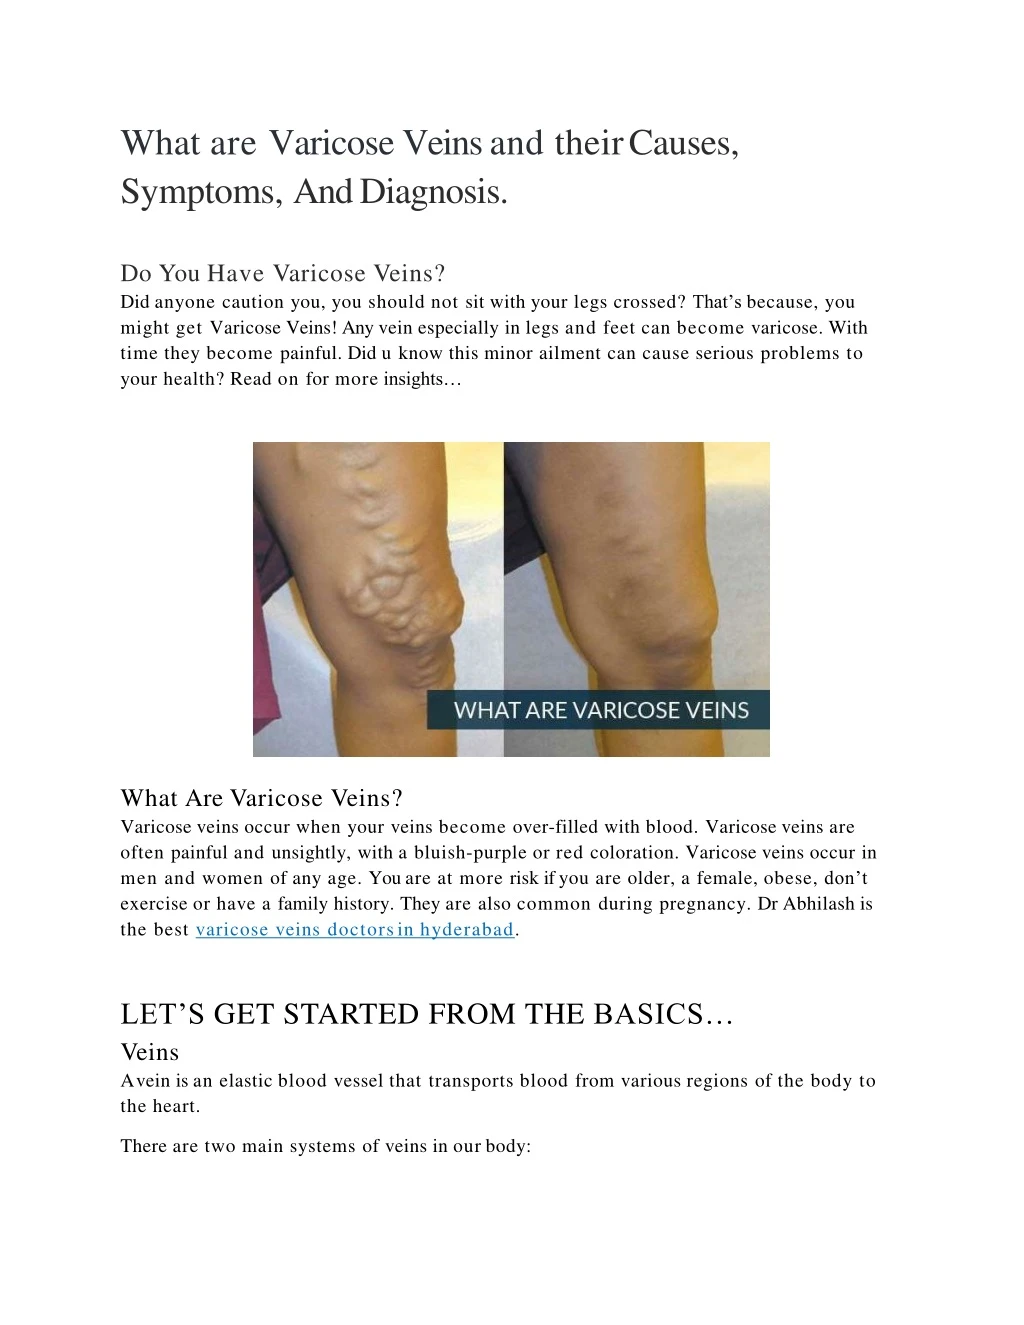 what are varicose veins and their causes symptoms and diagnosis